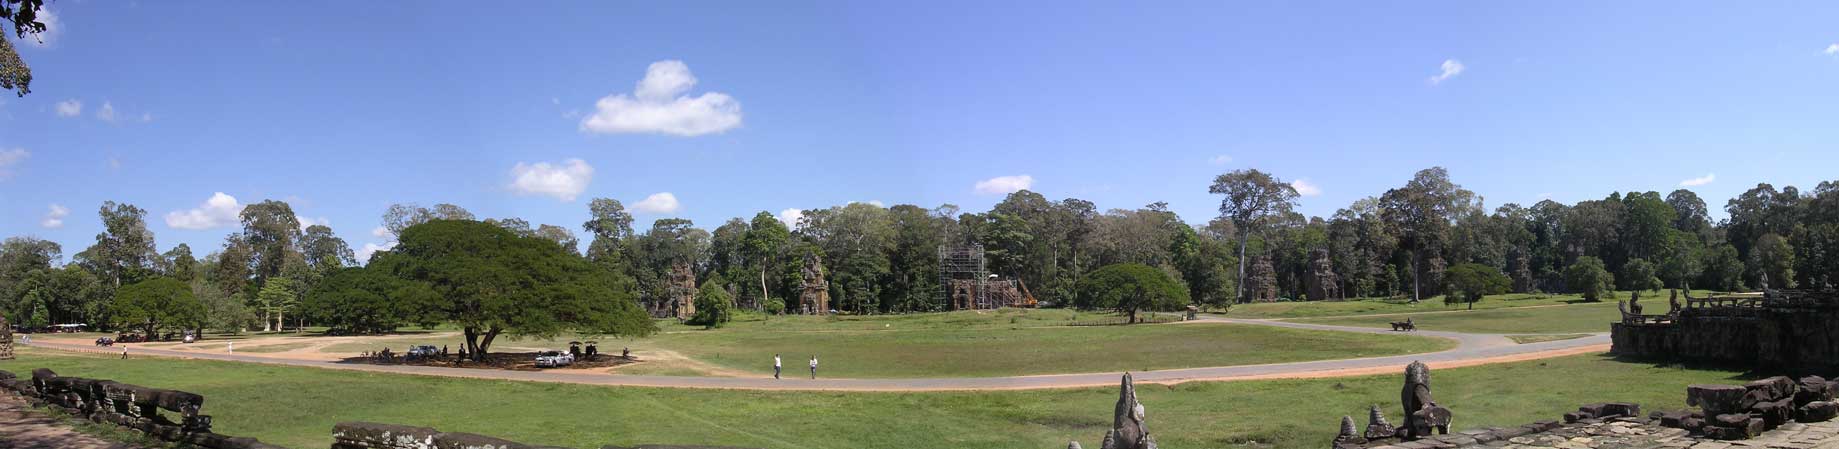 Panorama from the Terrace of Elephants, showing some of the 12 Towers of Prasat<br />(composite of 4 photographs)